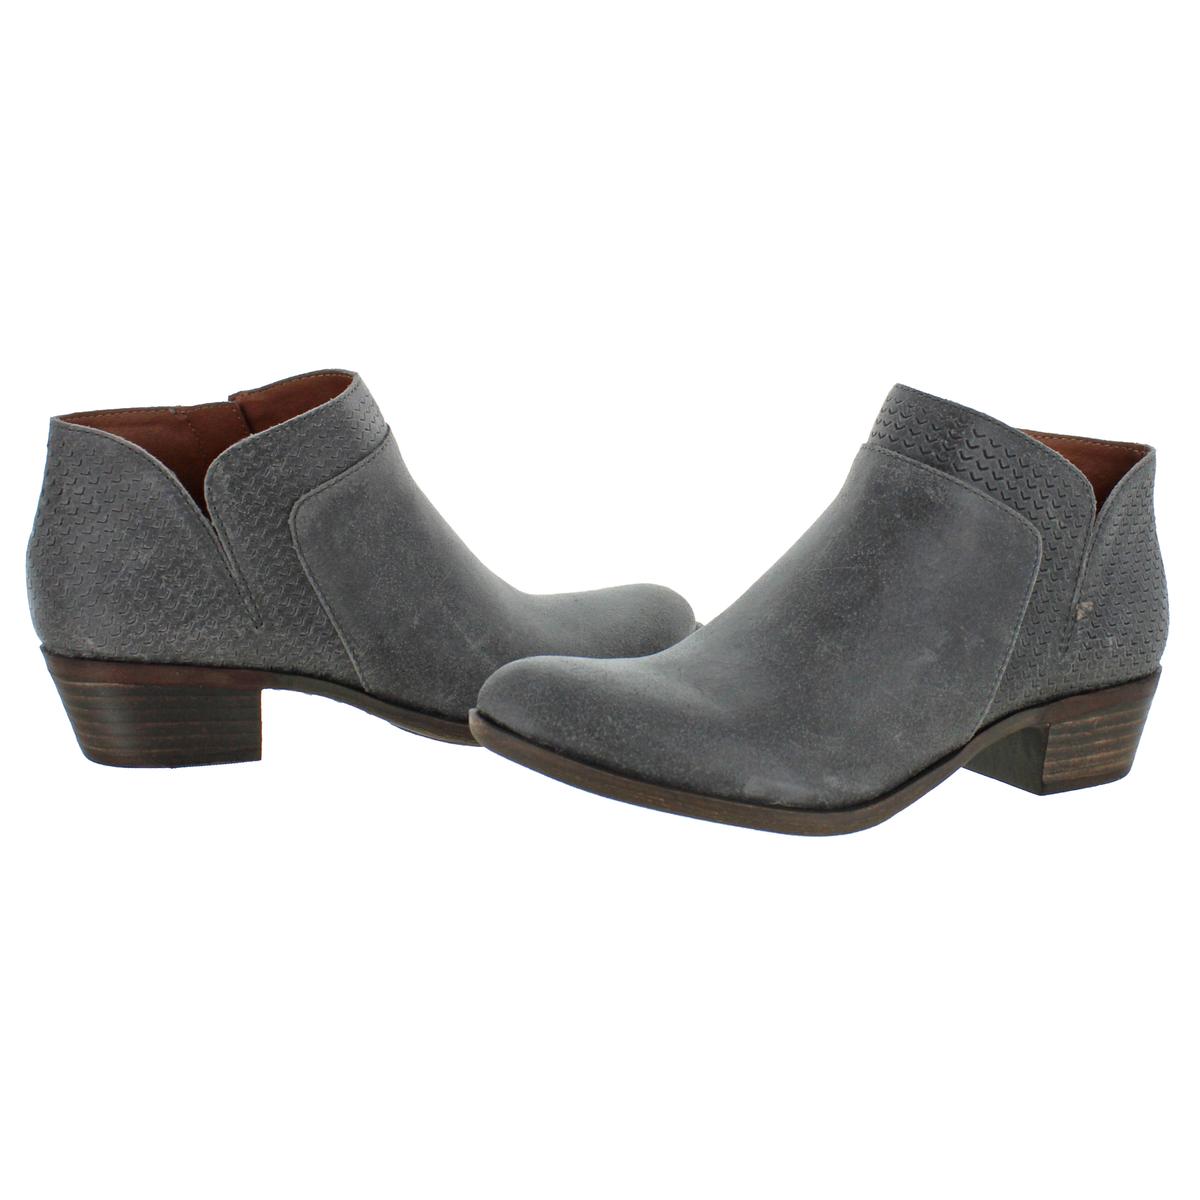 Lucky Brand Womens Brintly Gray Ankle Boots Shoes 11 Medium (B,M) BHFO ...